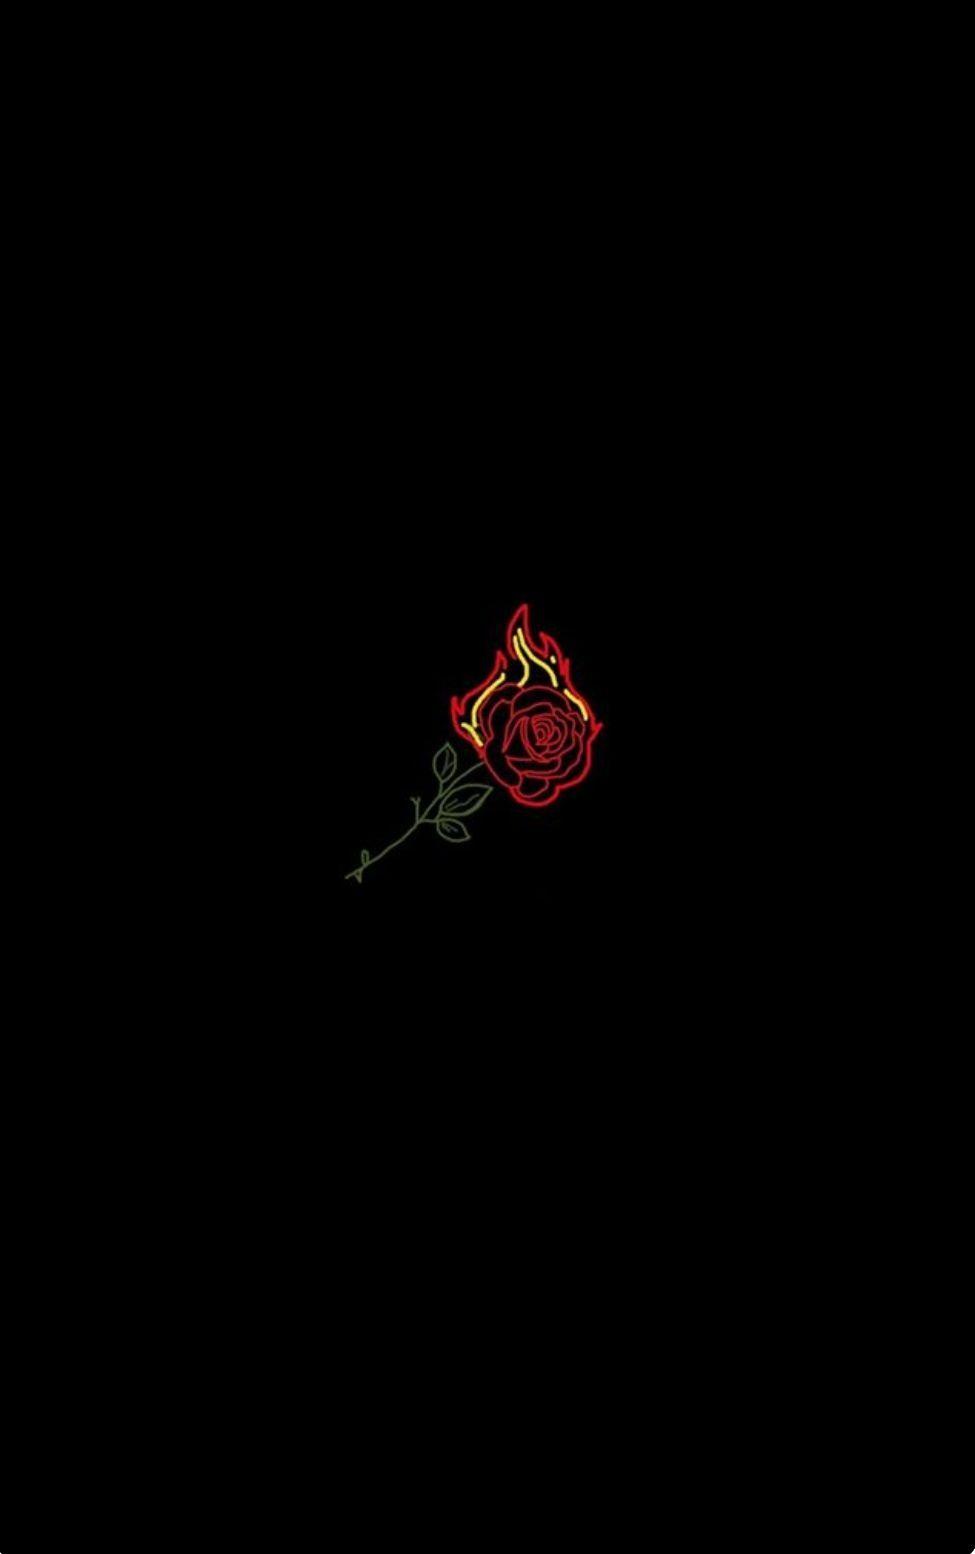 burning rose 1080P 2k 4k Full HD Wallpapers Backgrounds Free Download   Wallpaper Crafter